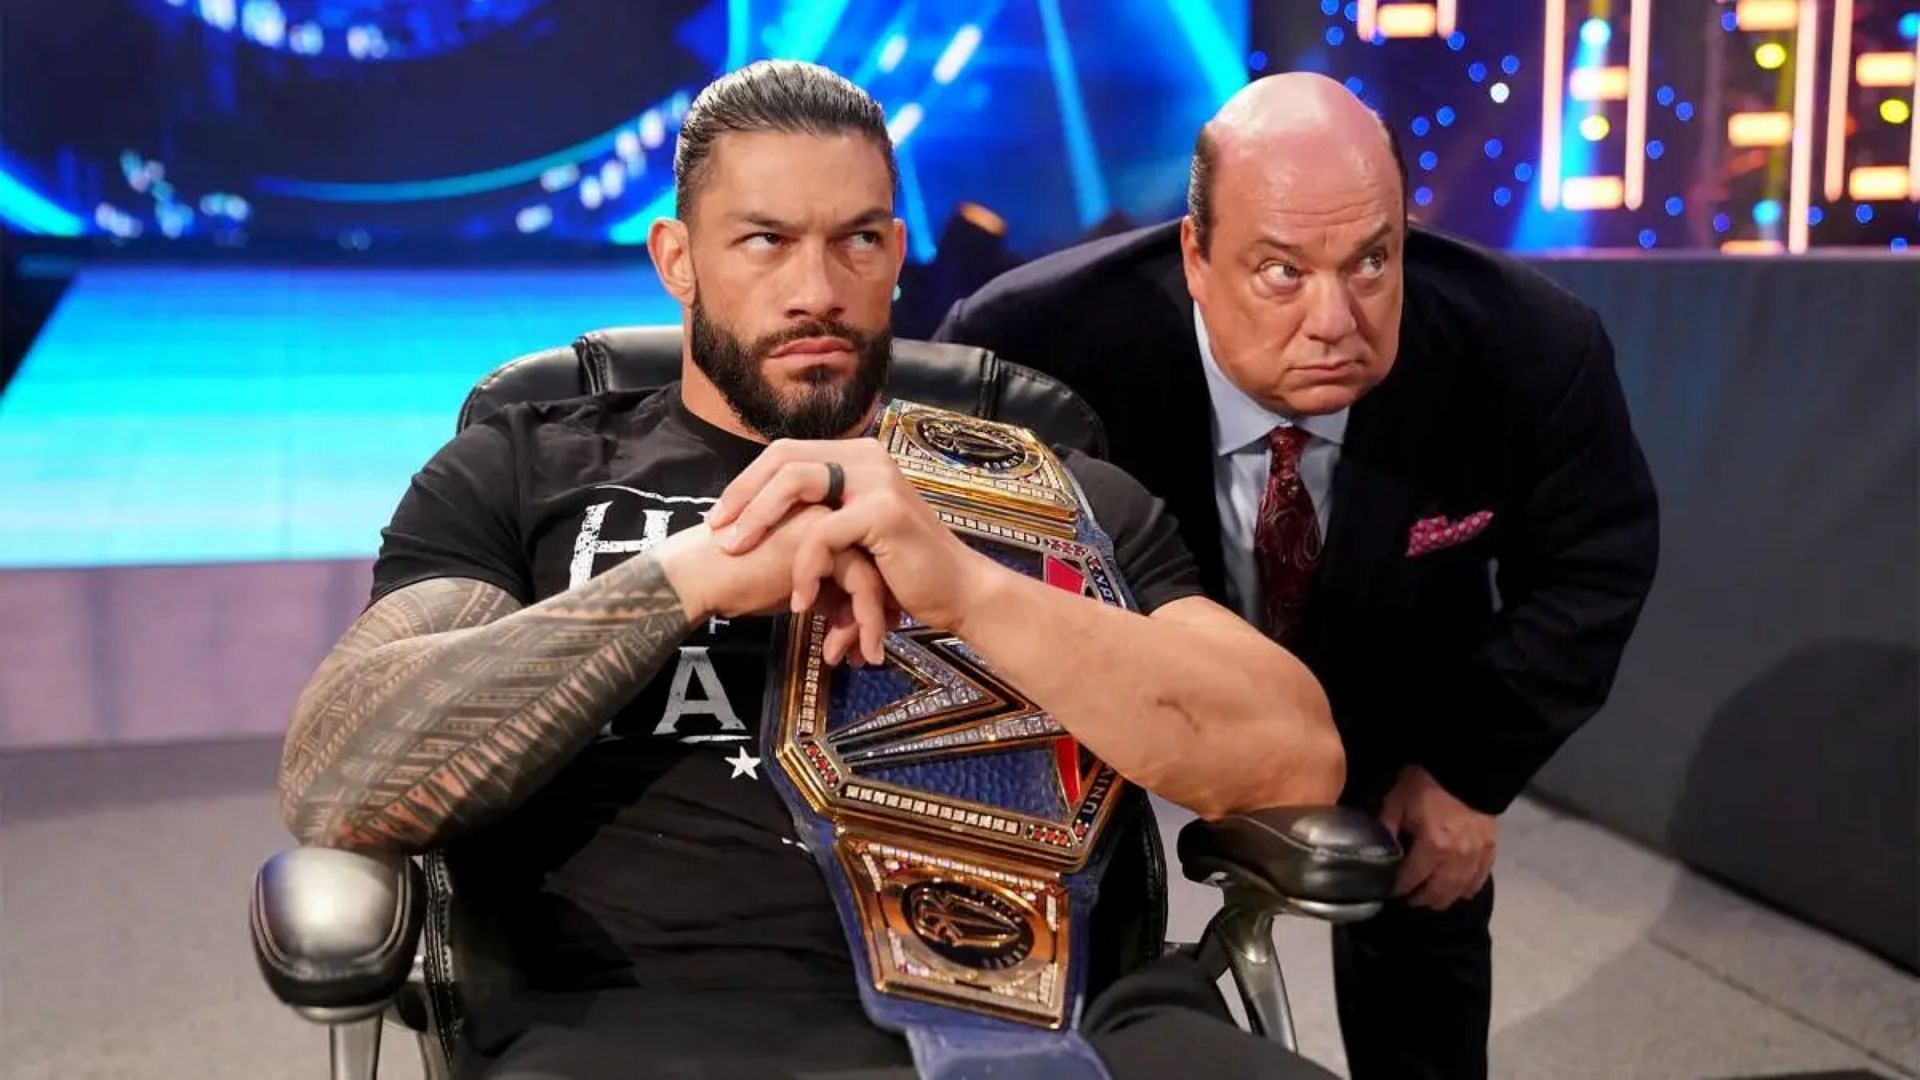 Is Heyman waiting for this former WWE Champion to return before he betrays Roman Reigns?